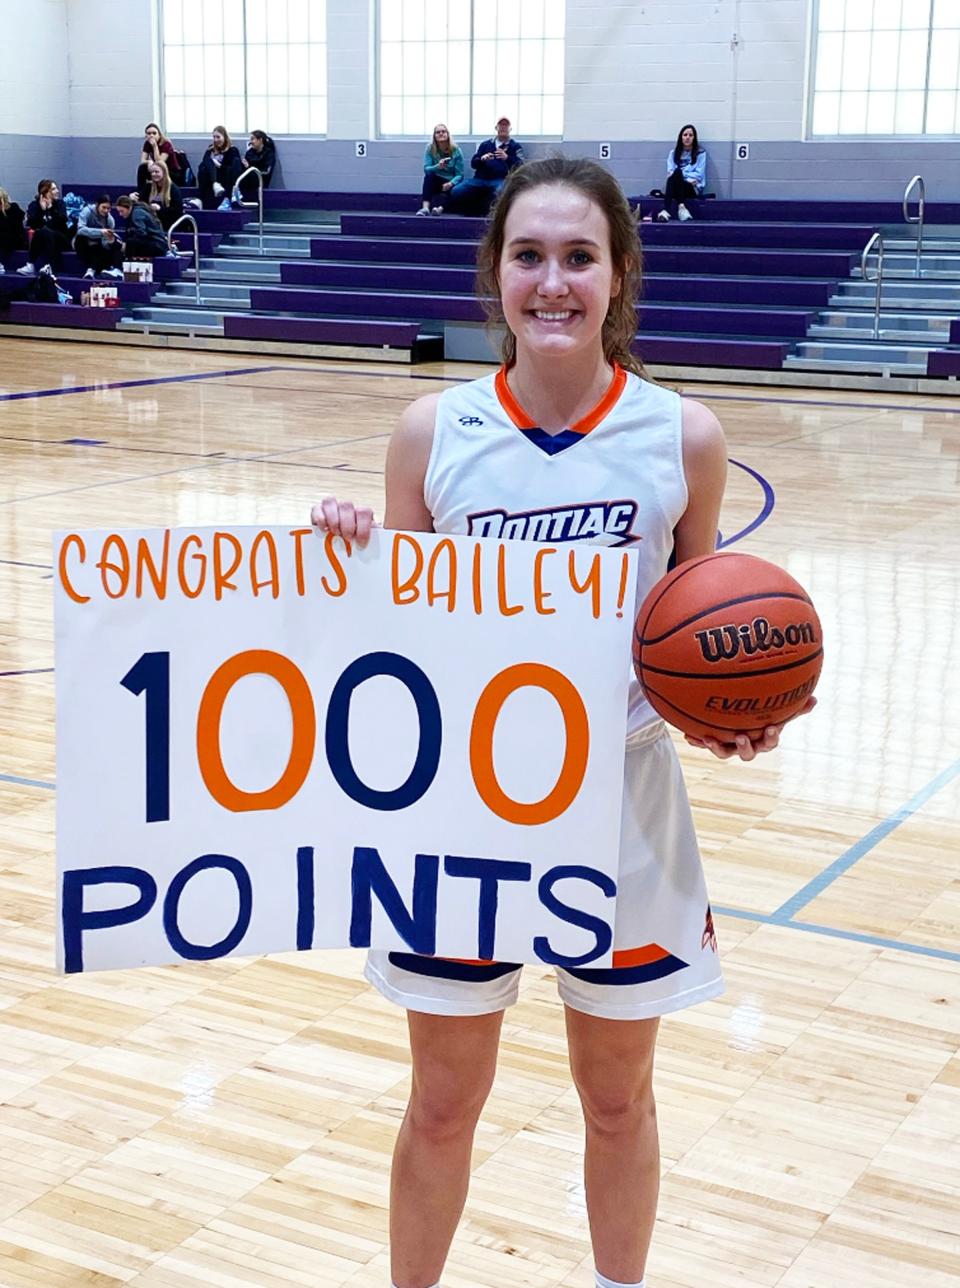 Pontiac junior Bailey Masching surpassed the 1,000-point mark for her career Saturday against Illini Central. She joins her sister, Addison, and mother, Lindsay (Dodson) in reaching the 1,000-point plateau at PTHS. Masching scored 18 points in Tuesday's win over Monticello for 1,025 points heading into Thursday's game at Rantoul.